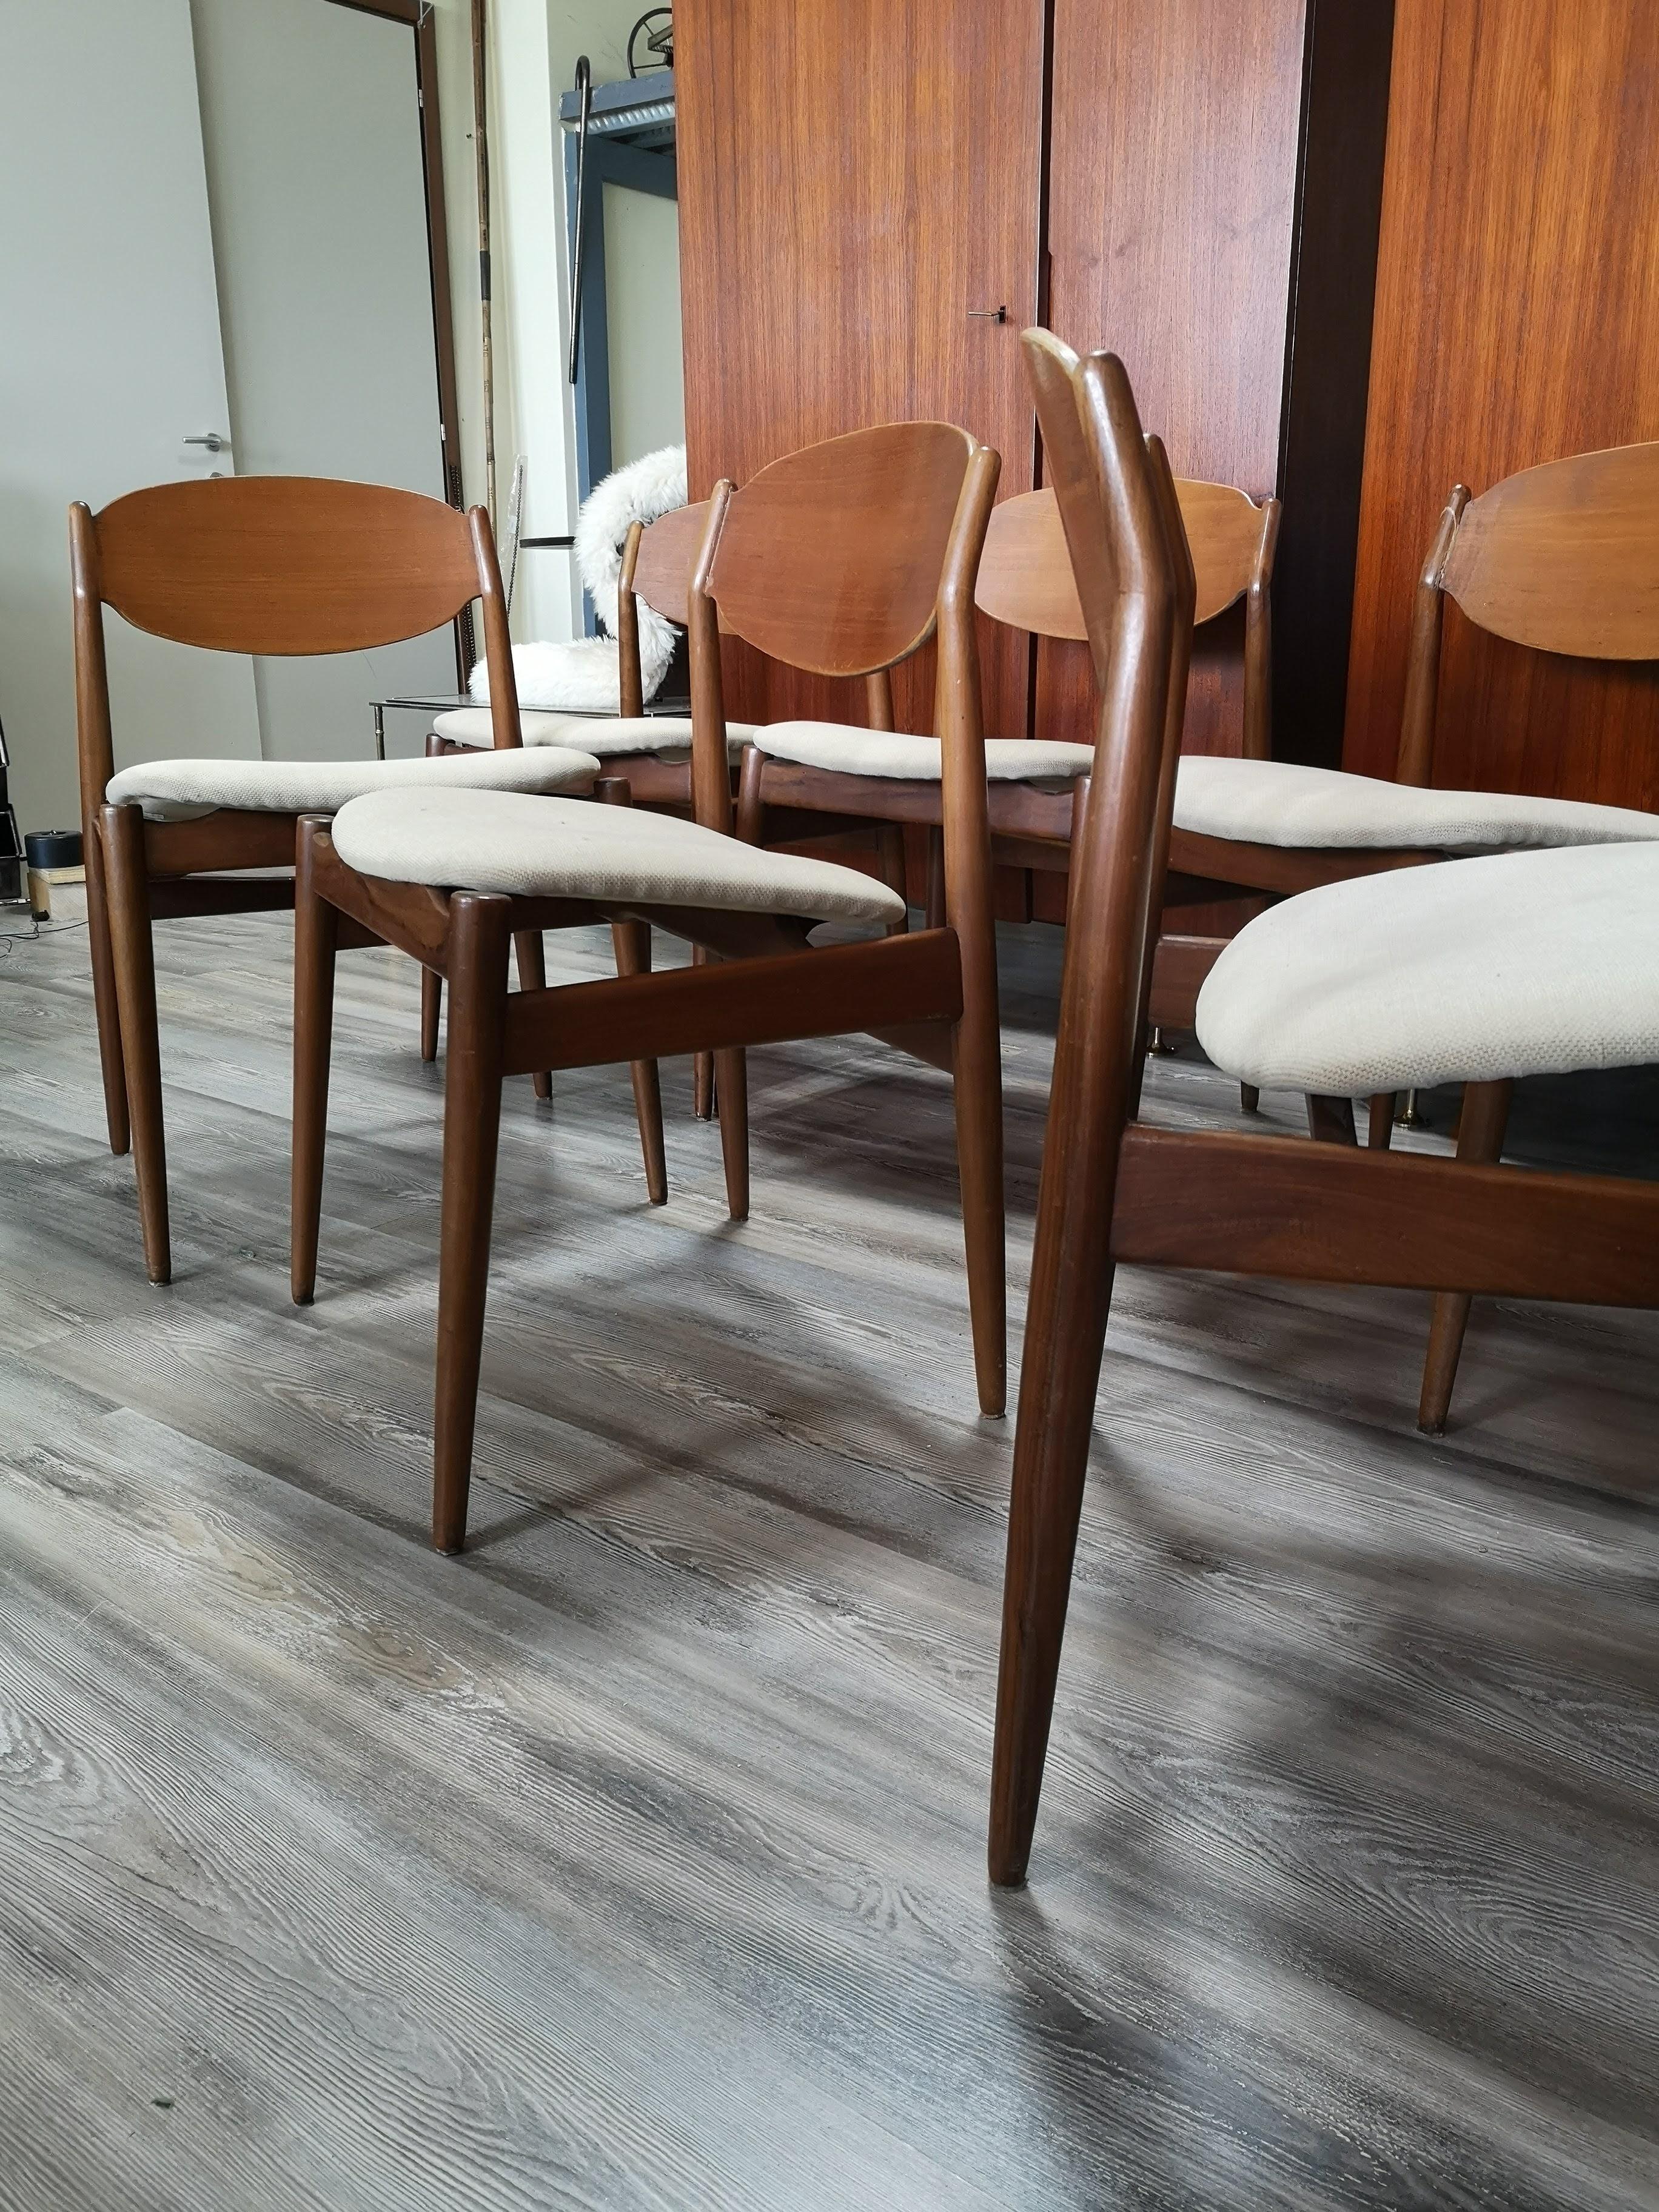 Set of 6 Chairs by Leonardo Fiori for ISA, Italy, 1960s For Sale 4